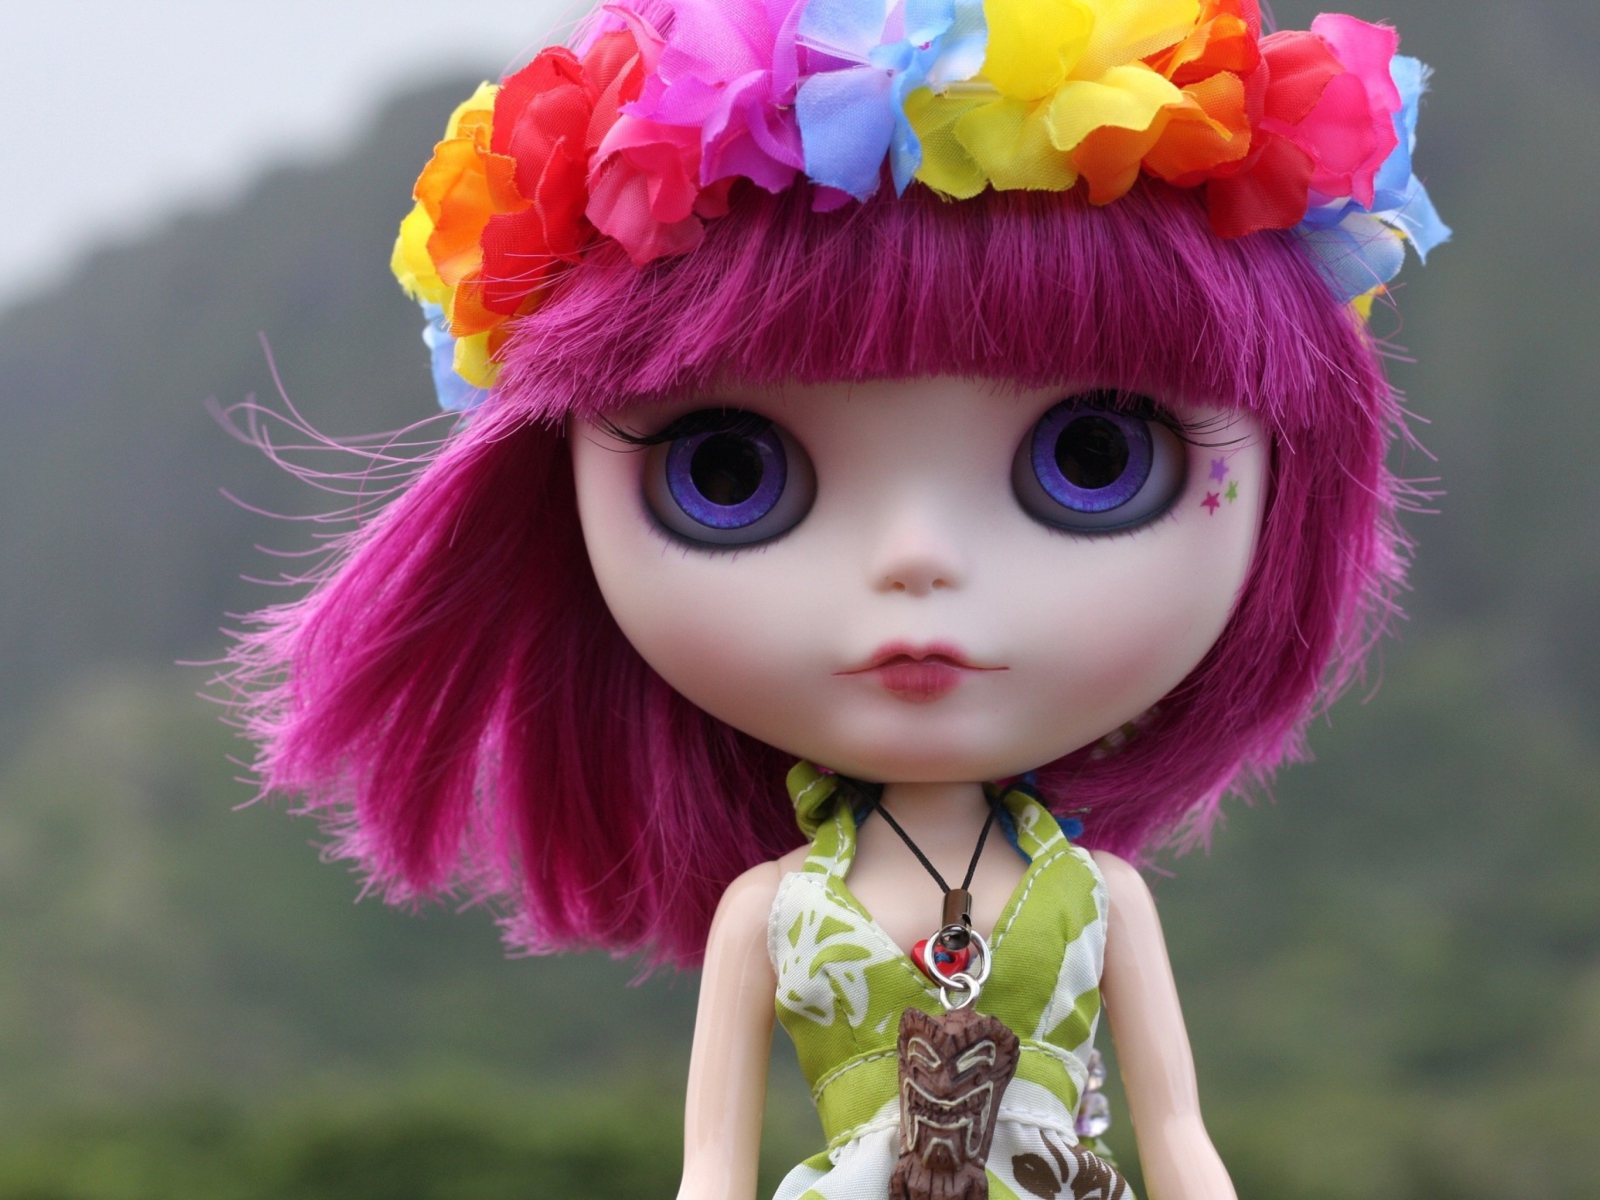 Doll With Pink Hair And Blue Eyes screenshot #1 1600x1200